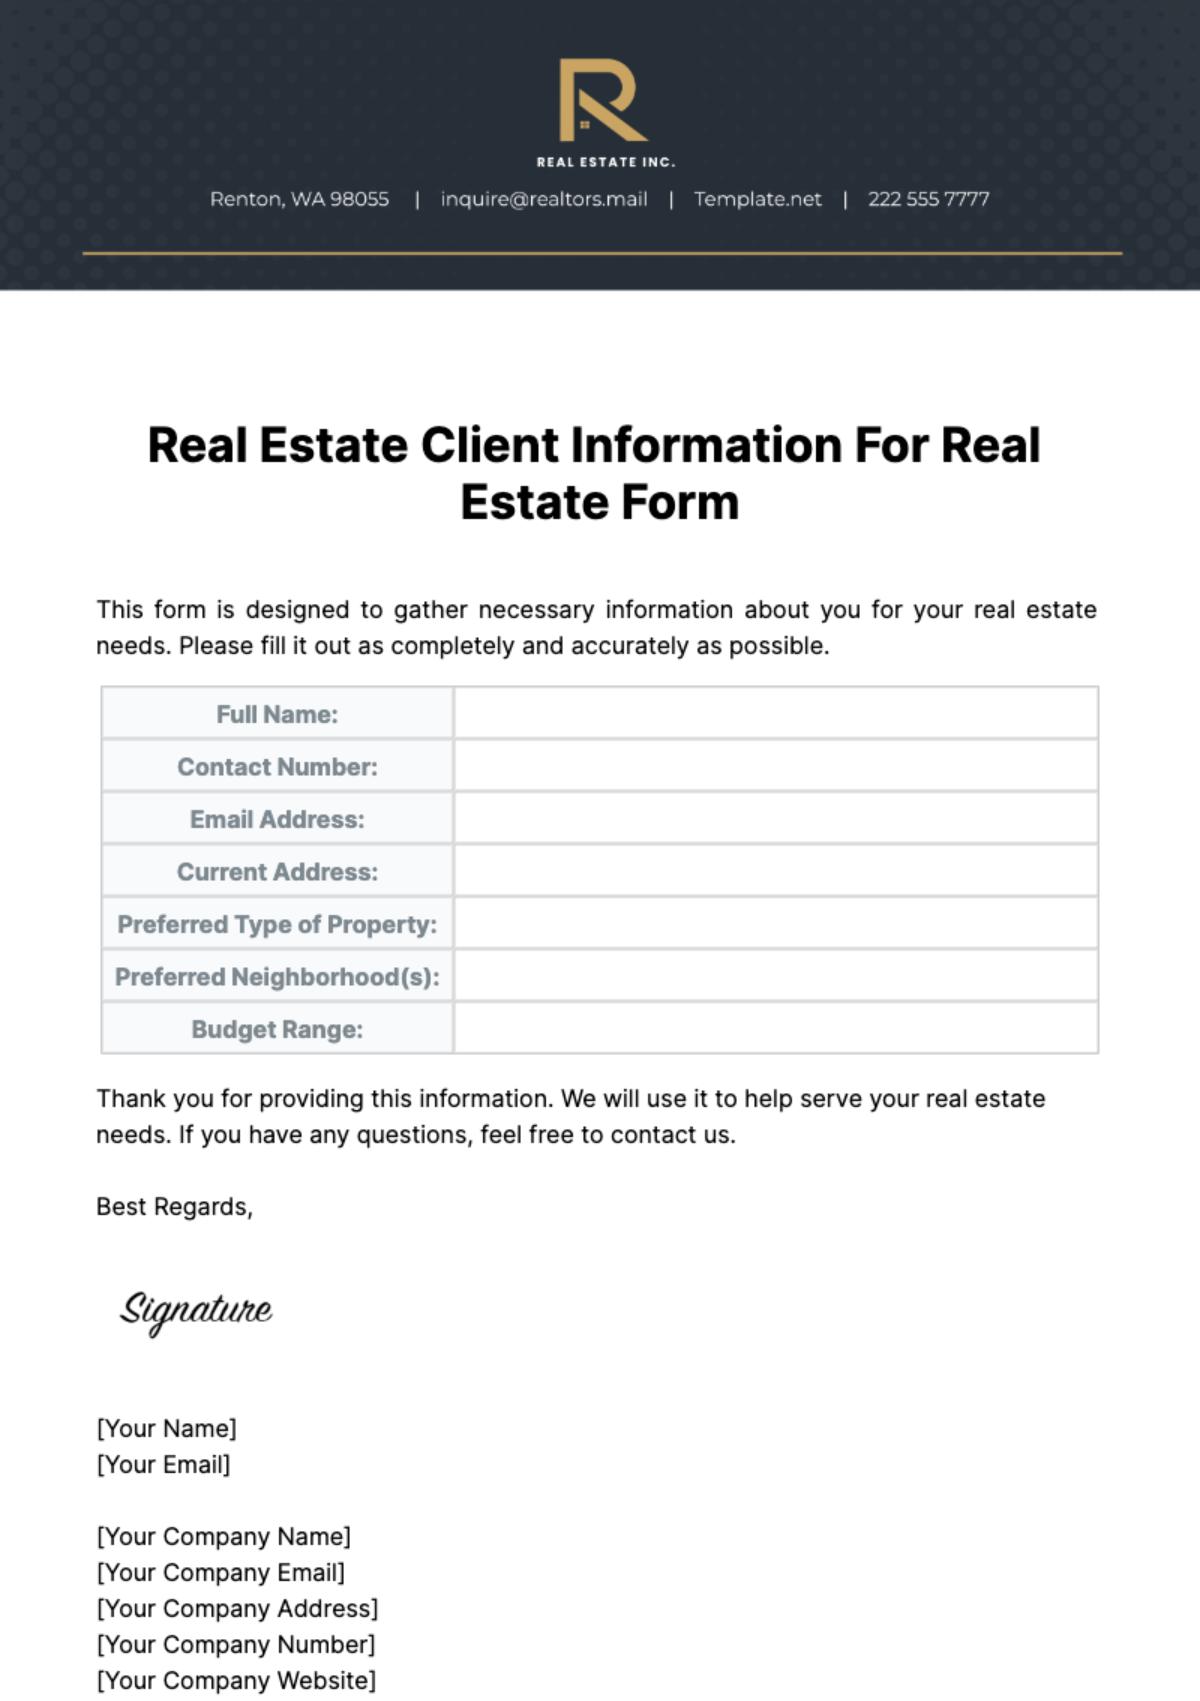 Real Estate Client Information For Real Estate Form Template